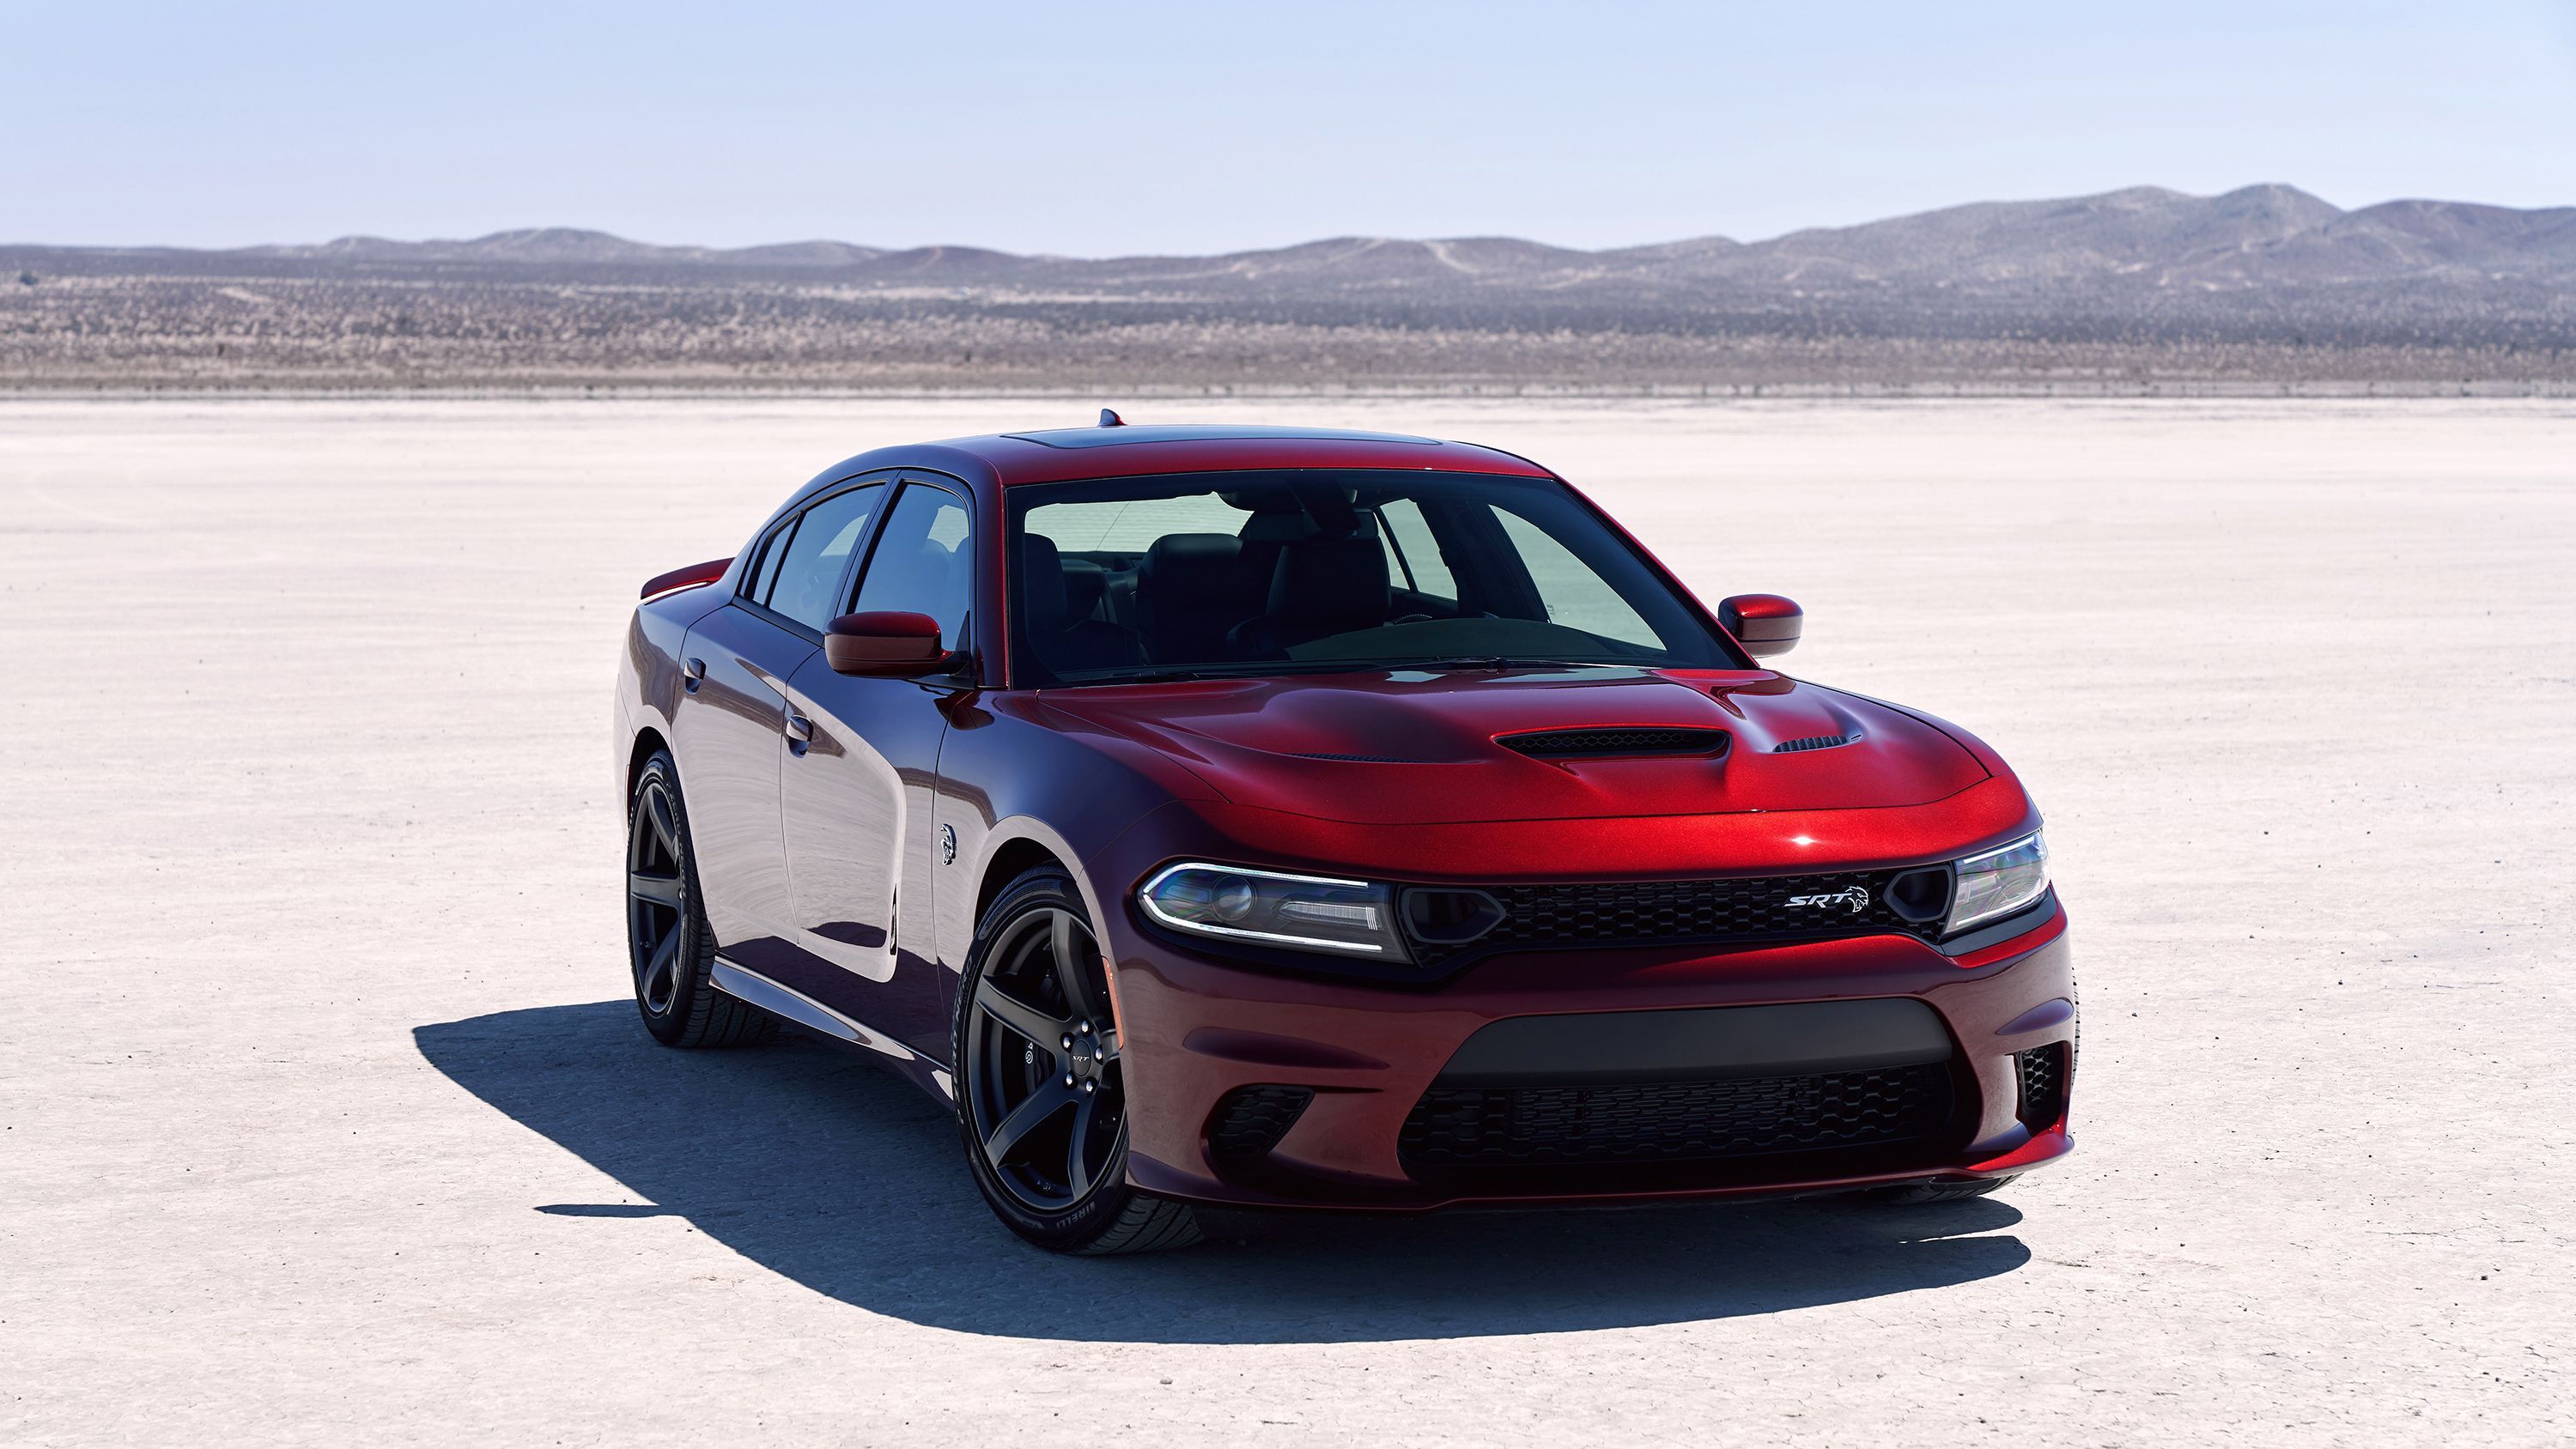 Dodge Charger Hellcat Wallpaper Free Dodge Charger Hellcat Background